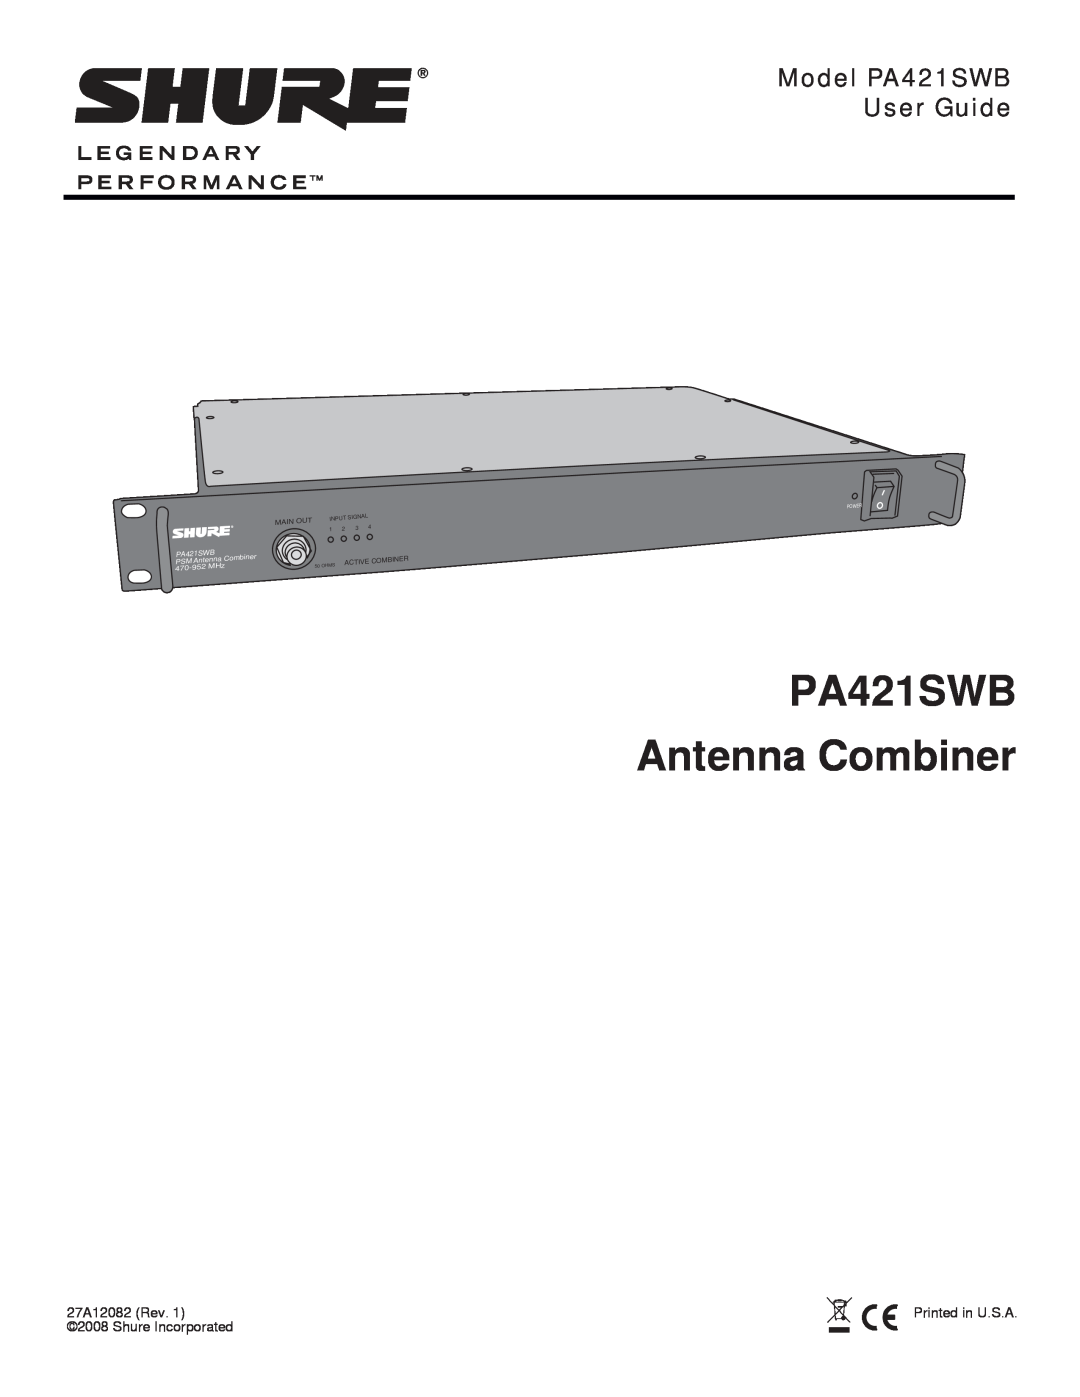 Shure manual PA421SWB Antenna Combiner, Model PA421SWB User Guide, PSM Ante, 470-952 MHz, Mainout, Ombine, Activec 